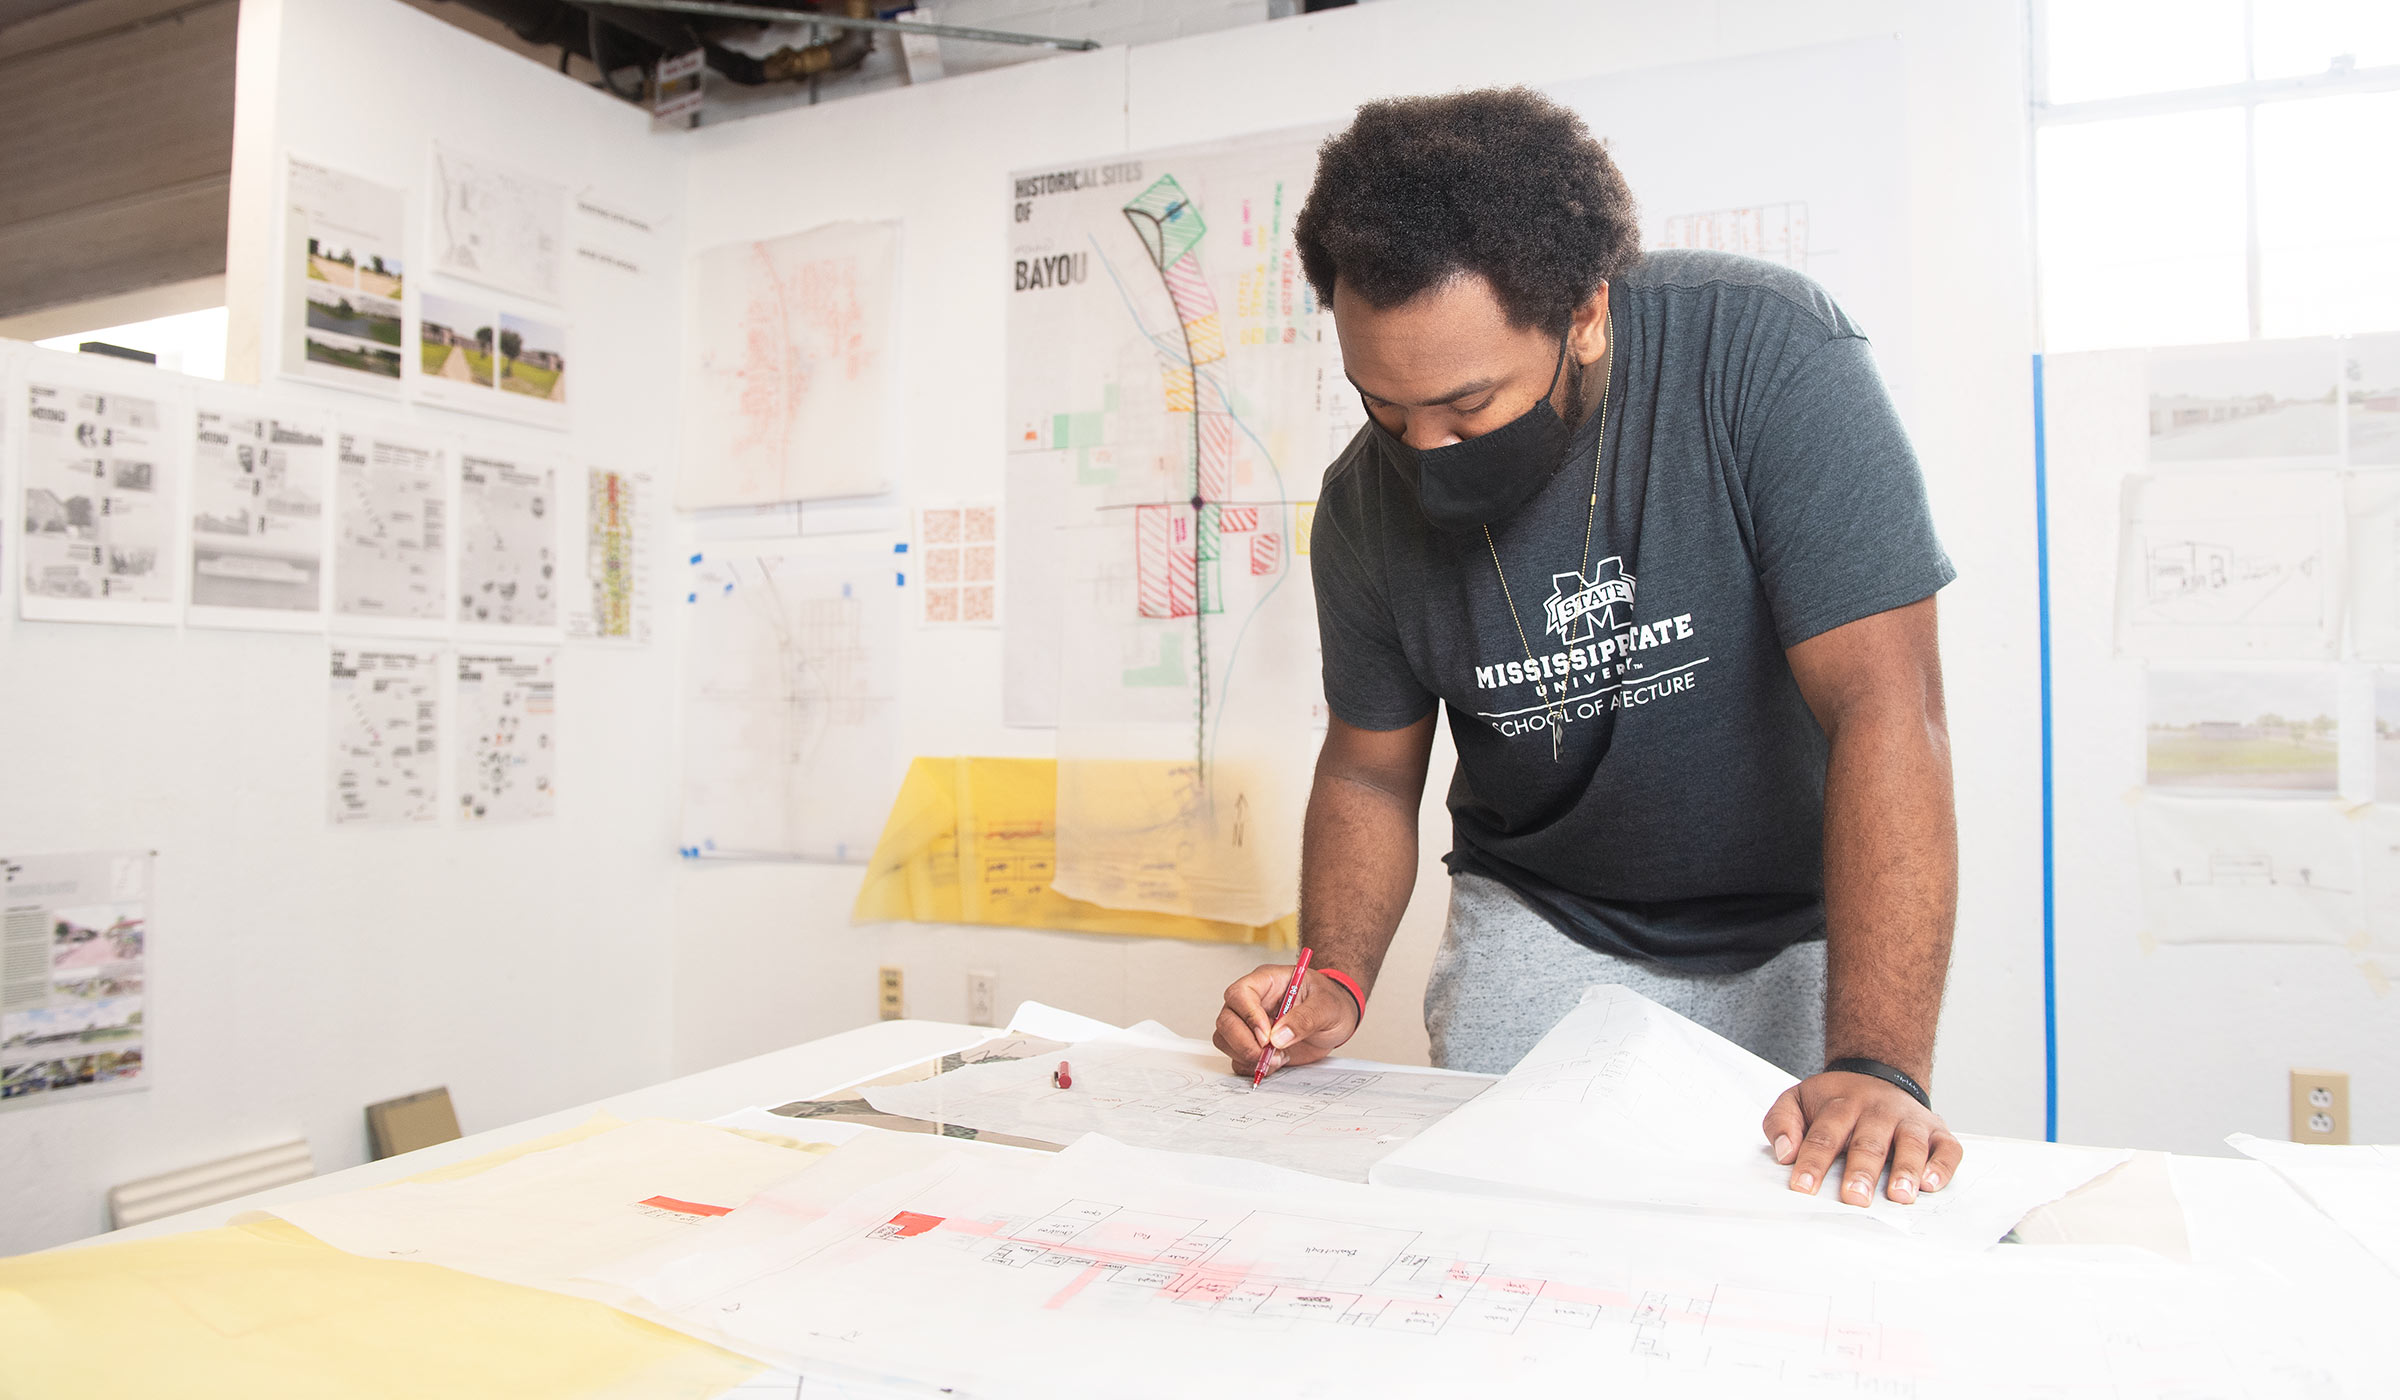 Terrance Blackmon leans over drafting table writing with pen